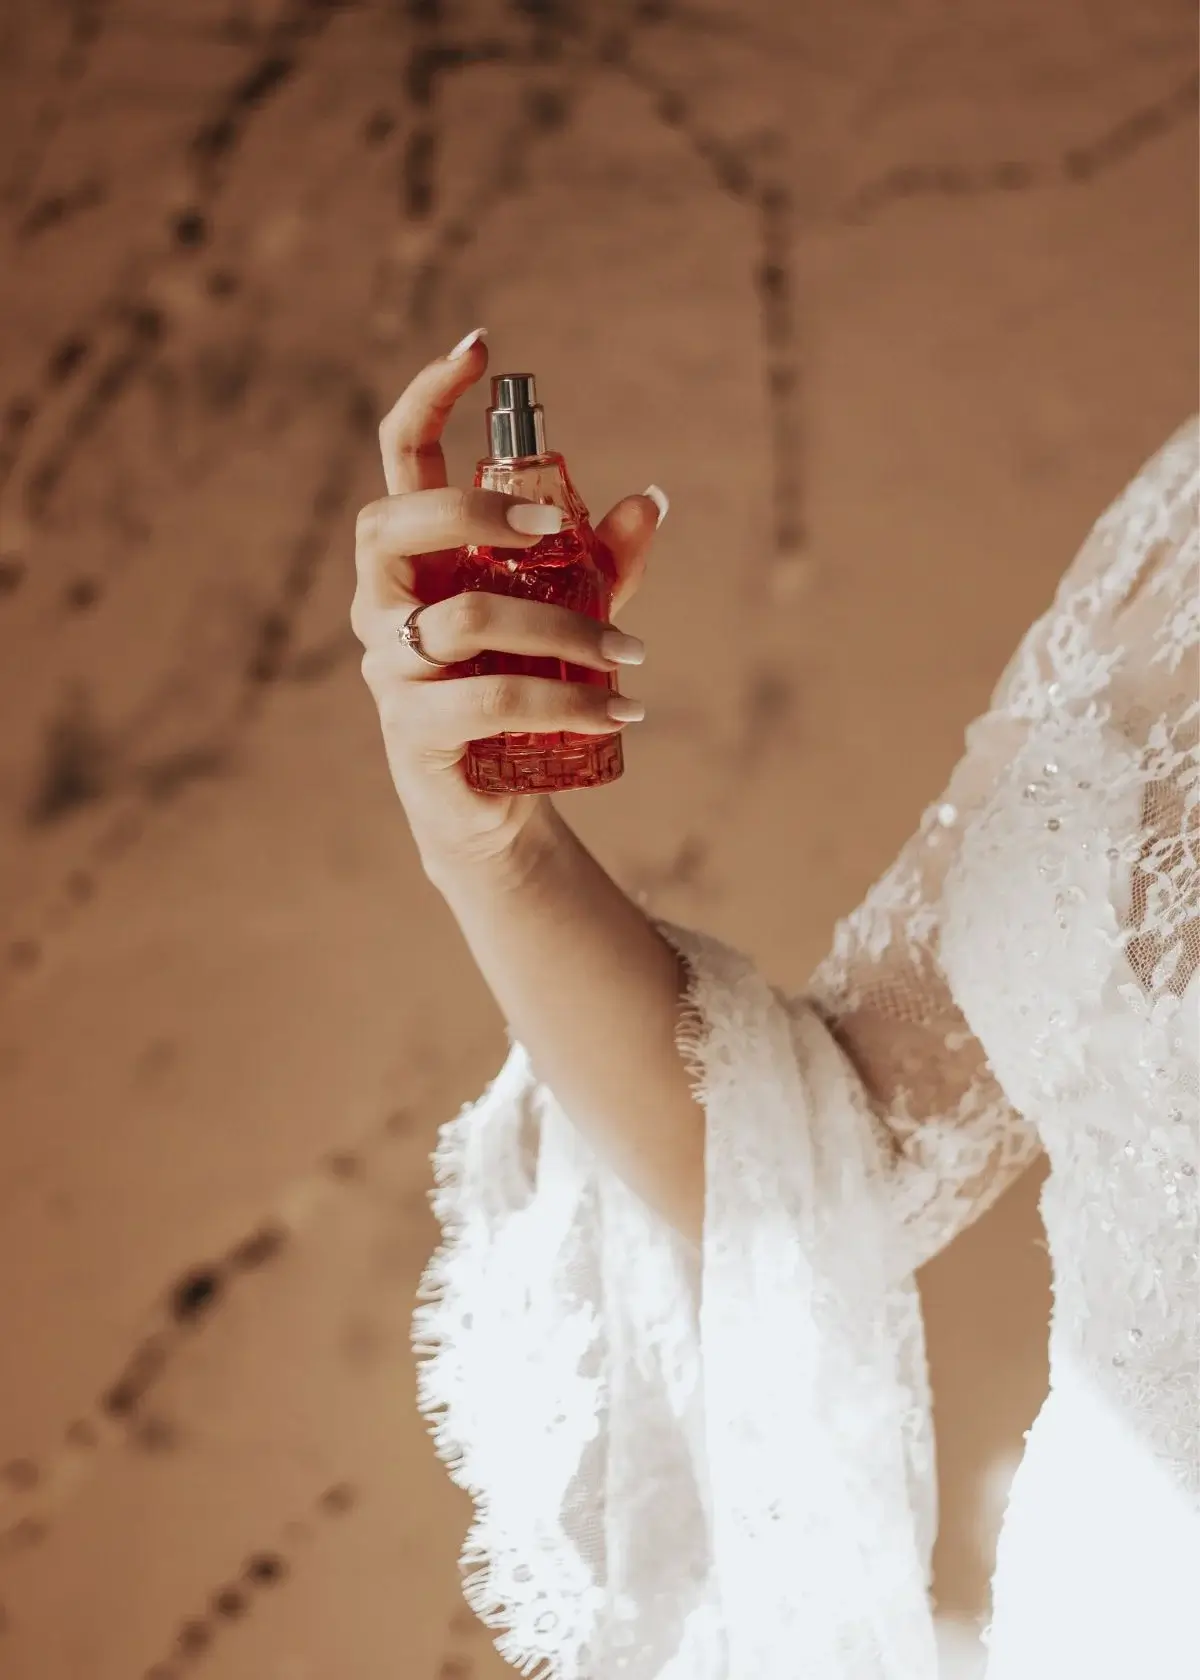 How to choose the right fresh-smelling perfume?